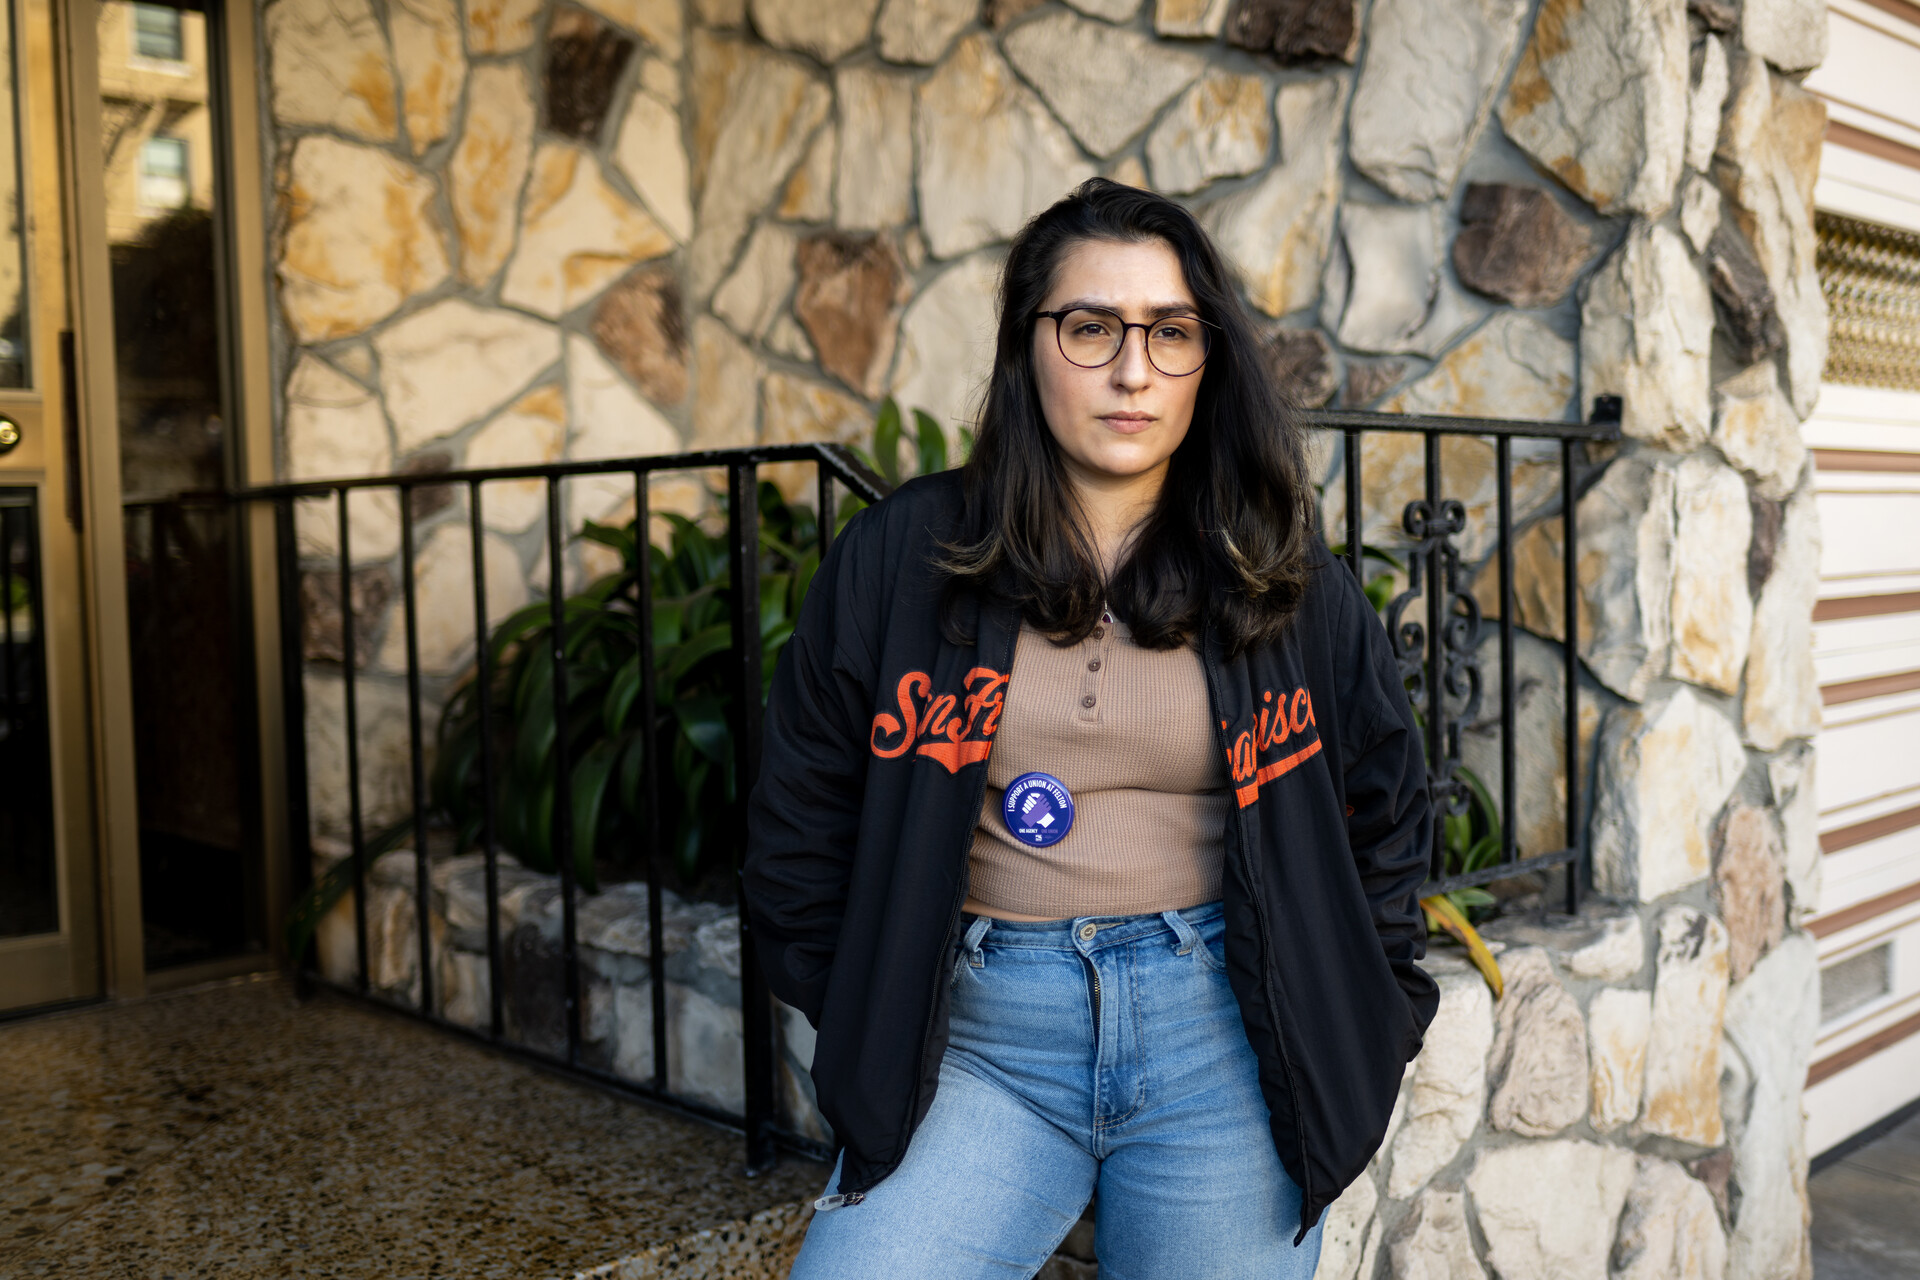 A woman with glasses and a SF Giants jacket stands in front of stone building.